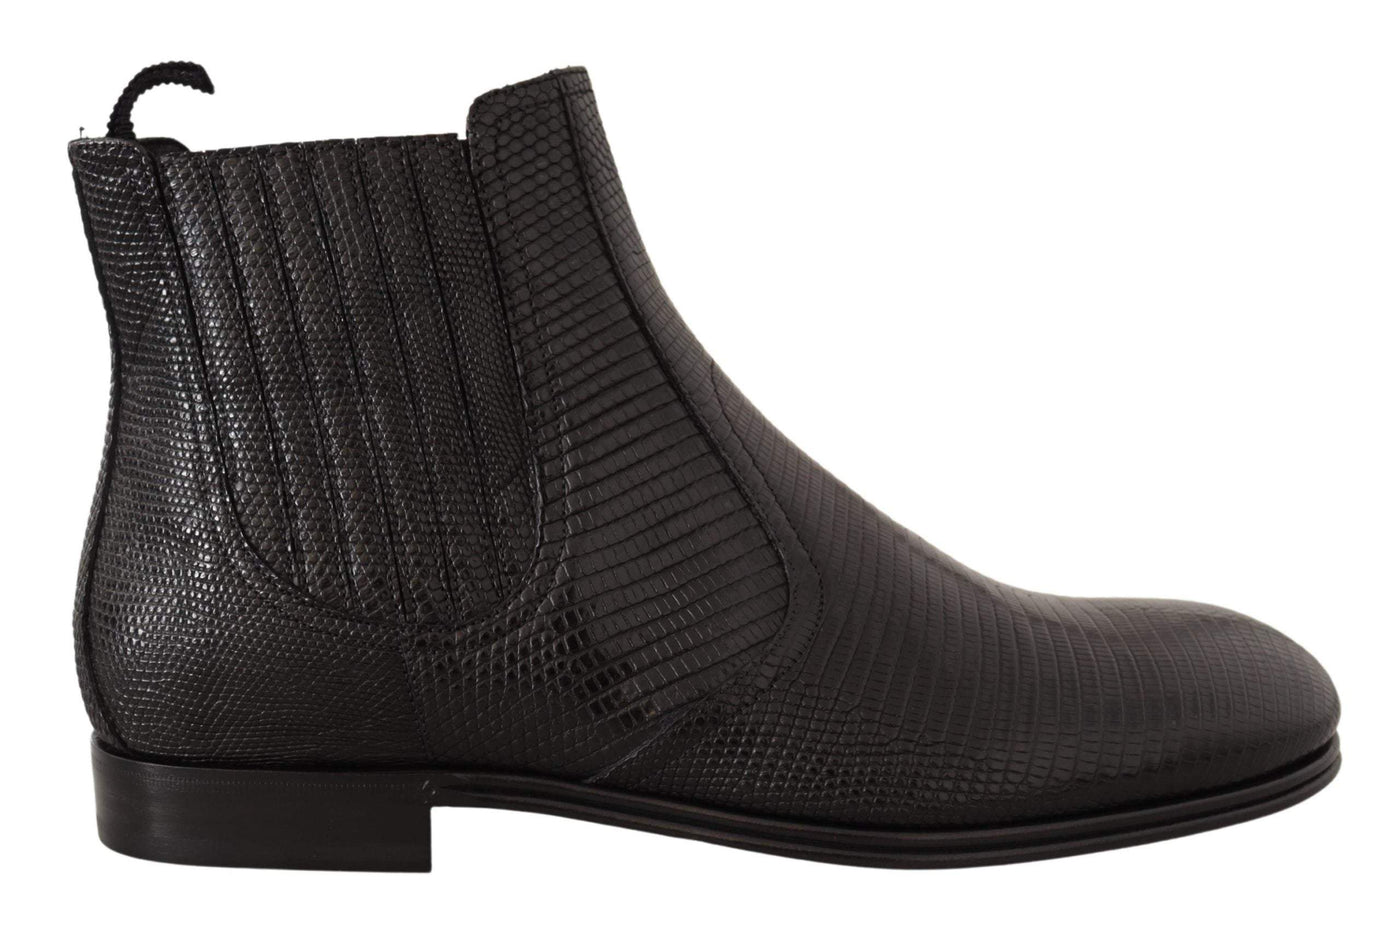 Dolce & Gabbana Black Leather Lizard Skin Ankle Boots #men, Black, Boots - Men - Shoes, Dolce & Gabbana, EU40/US7, feed-agegroup-adult, feed-color-Black, feed-gender-male at SEYMAYKA